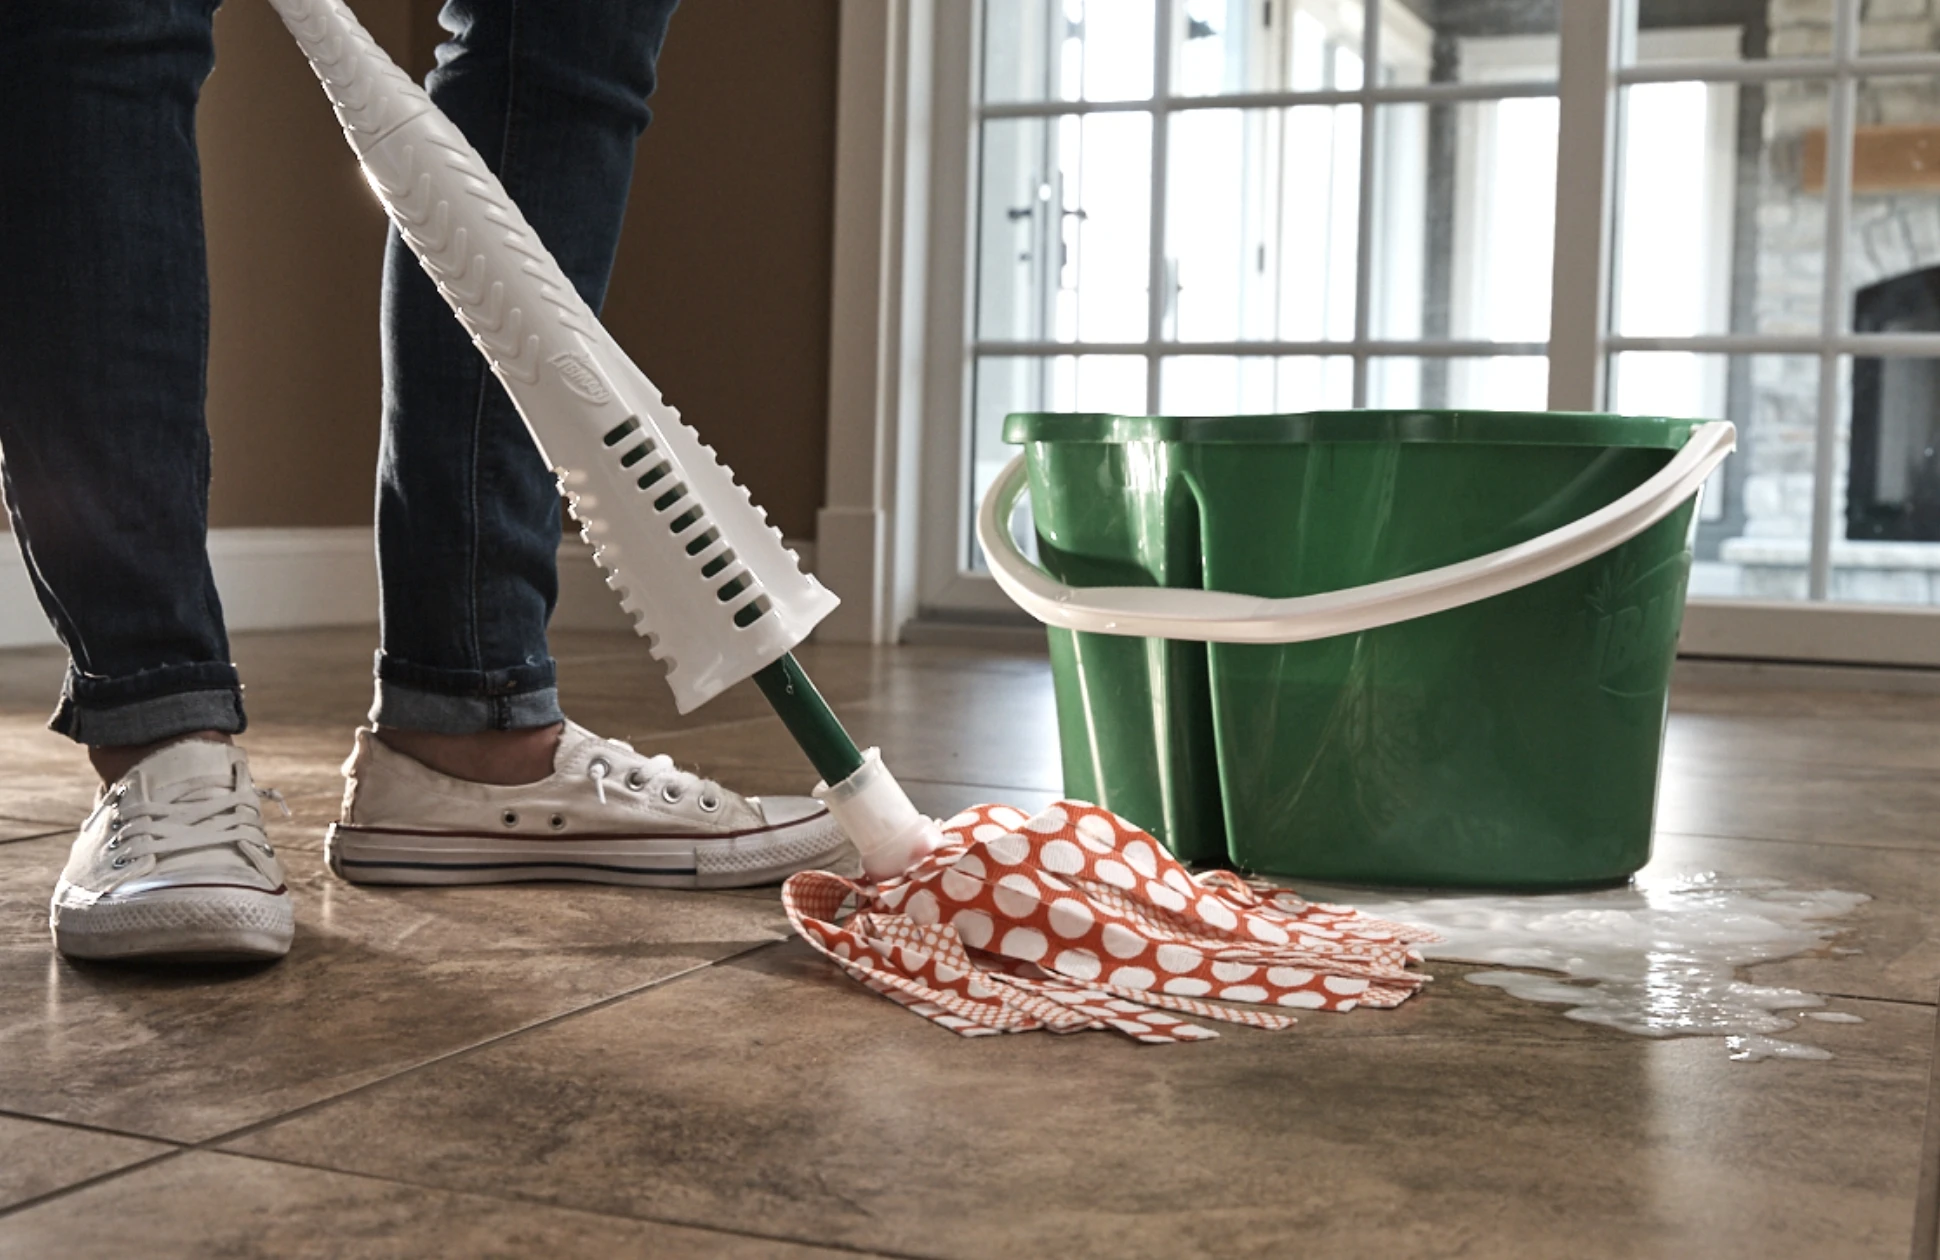 A woman mopping a floor with a mop and bucket.